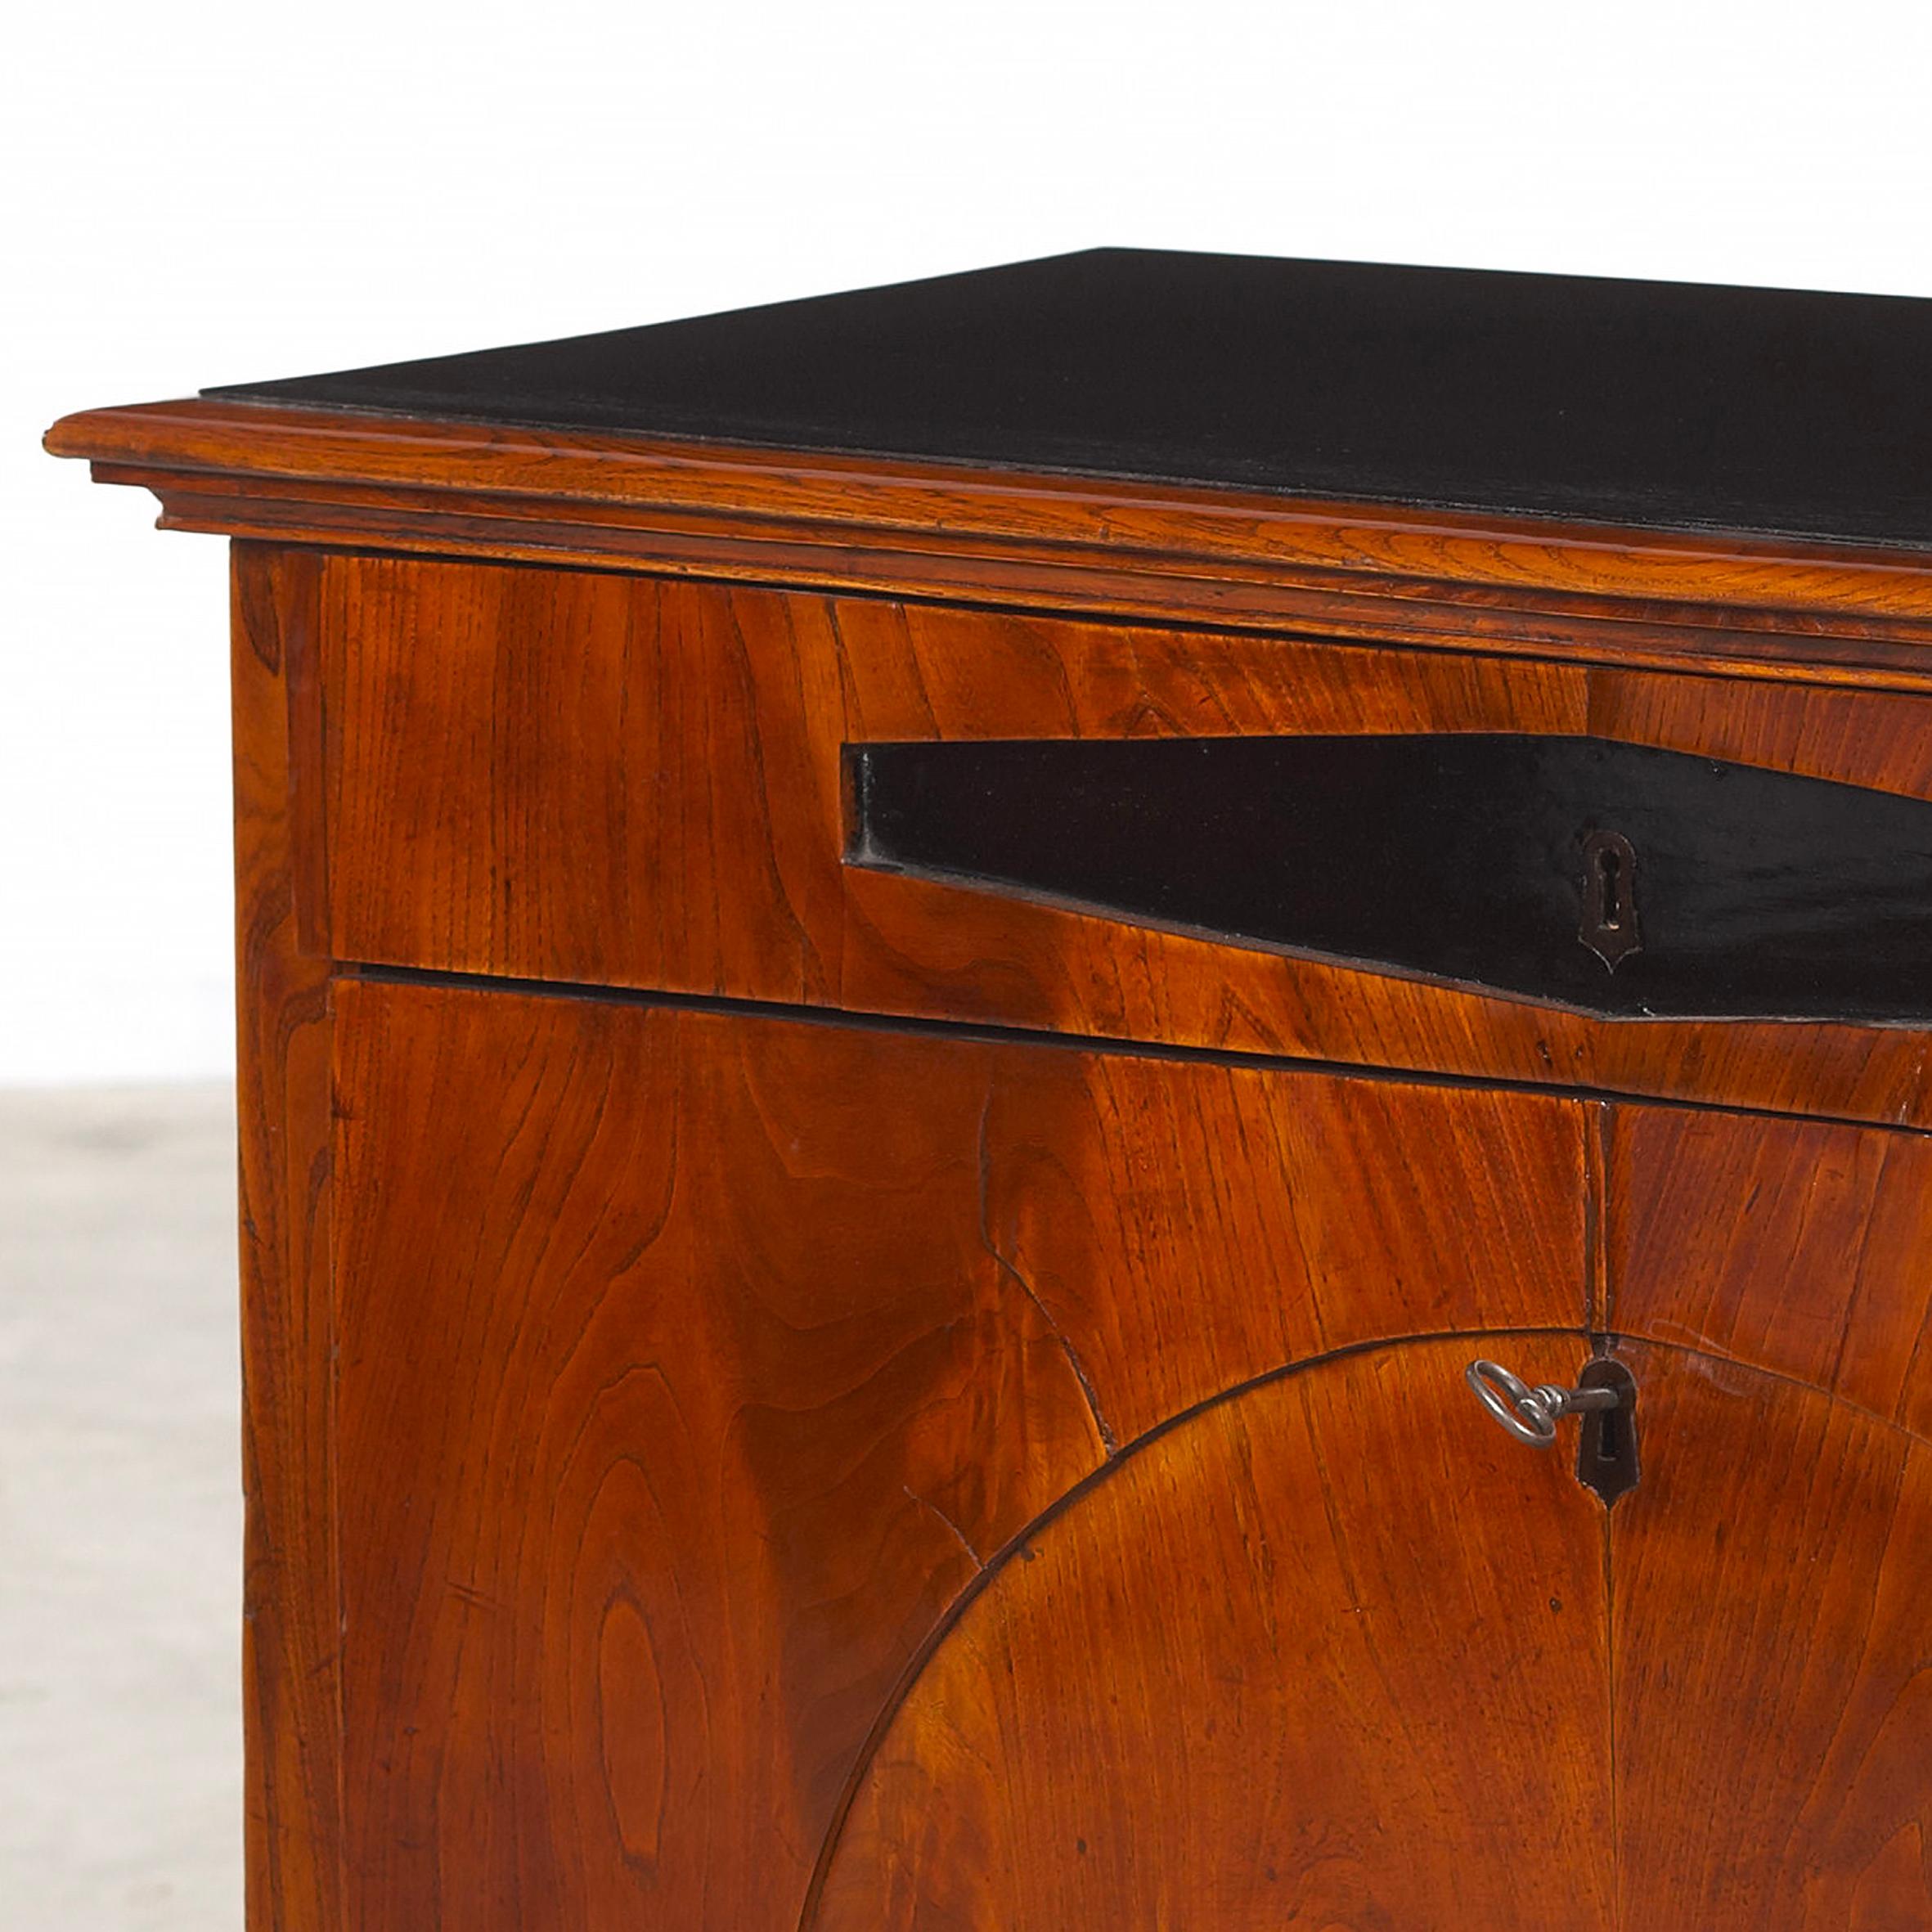 Danish late Empire chest of drawers in elm veneer, ebonized top and front inserts. Dating approximate 1830.